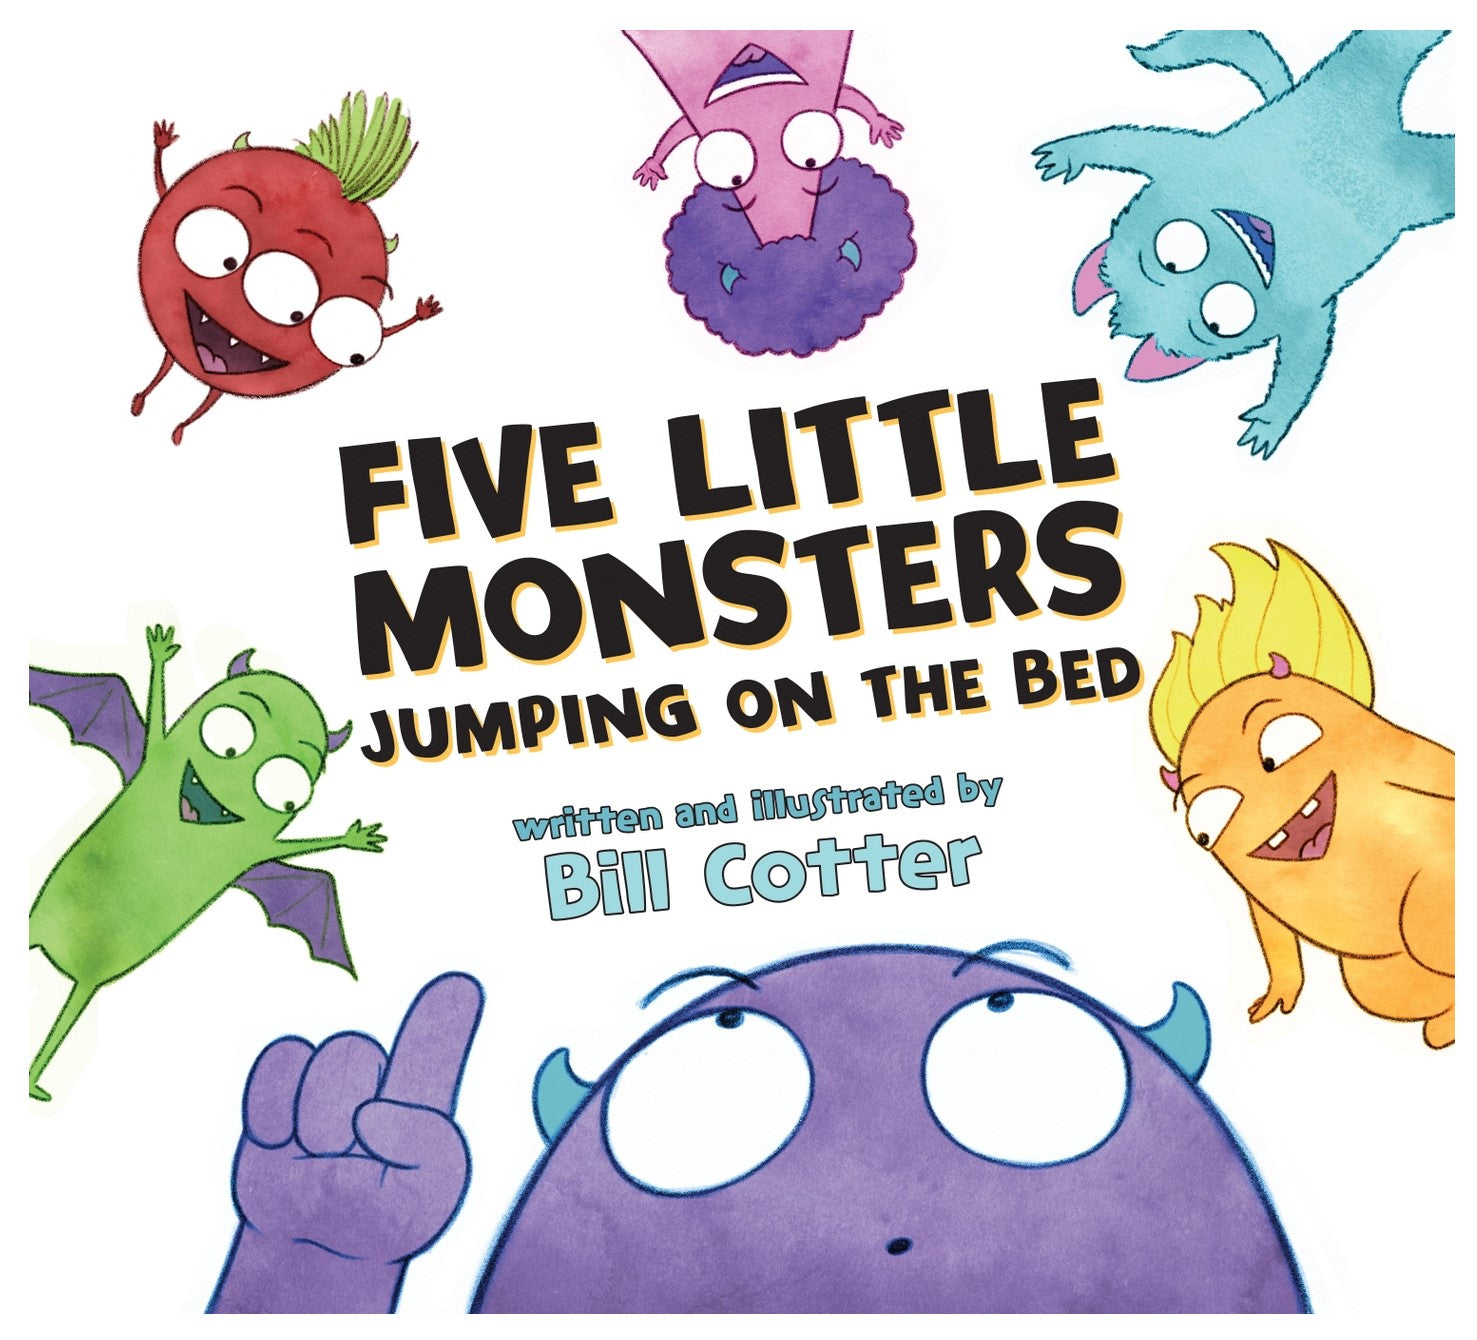 5 Little Monsters Jumping on the Bed